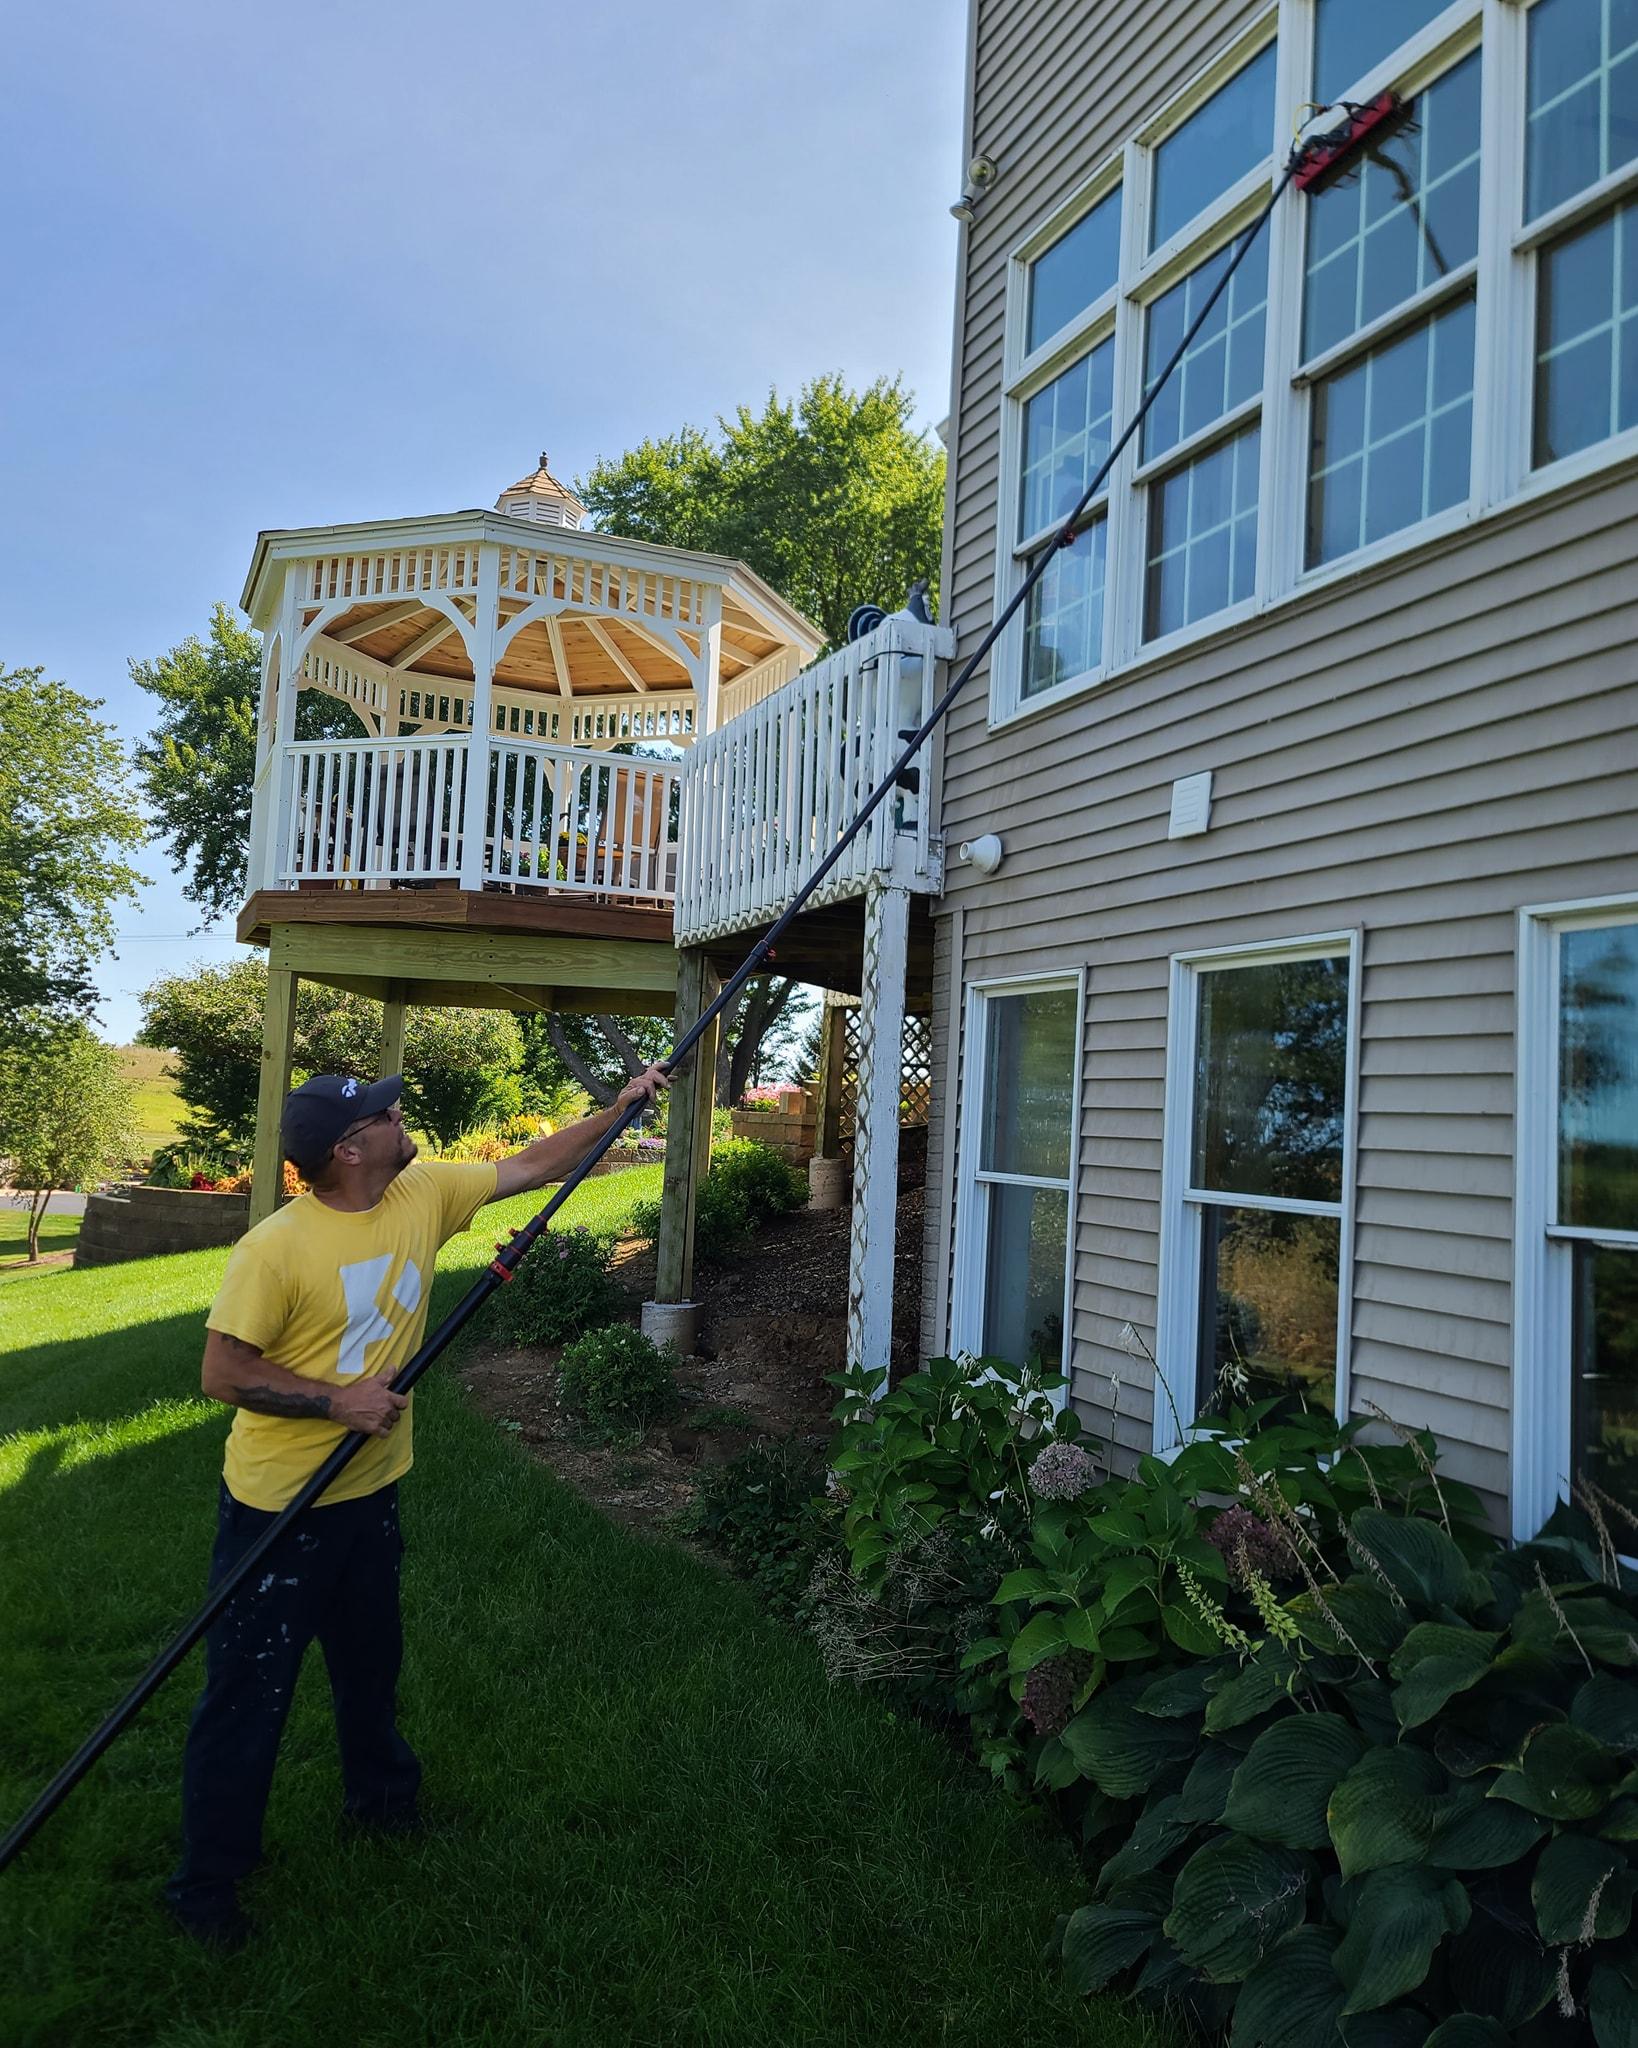 Window Cleaning, Gutter Cleaning & Pressure Washing company Paneless Window Cleaning LLC in Iowa City, IA